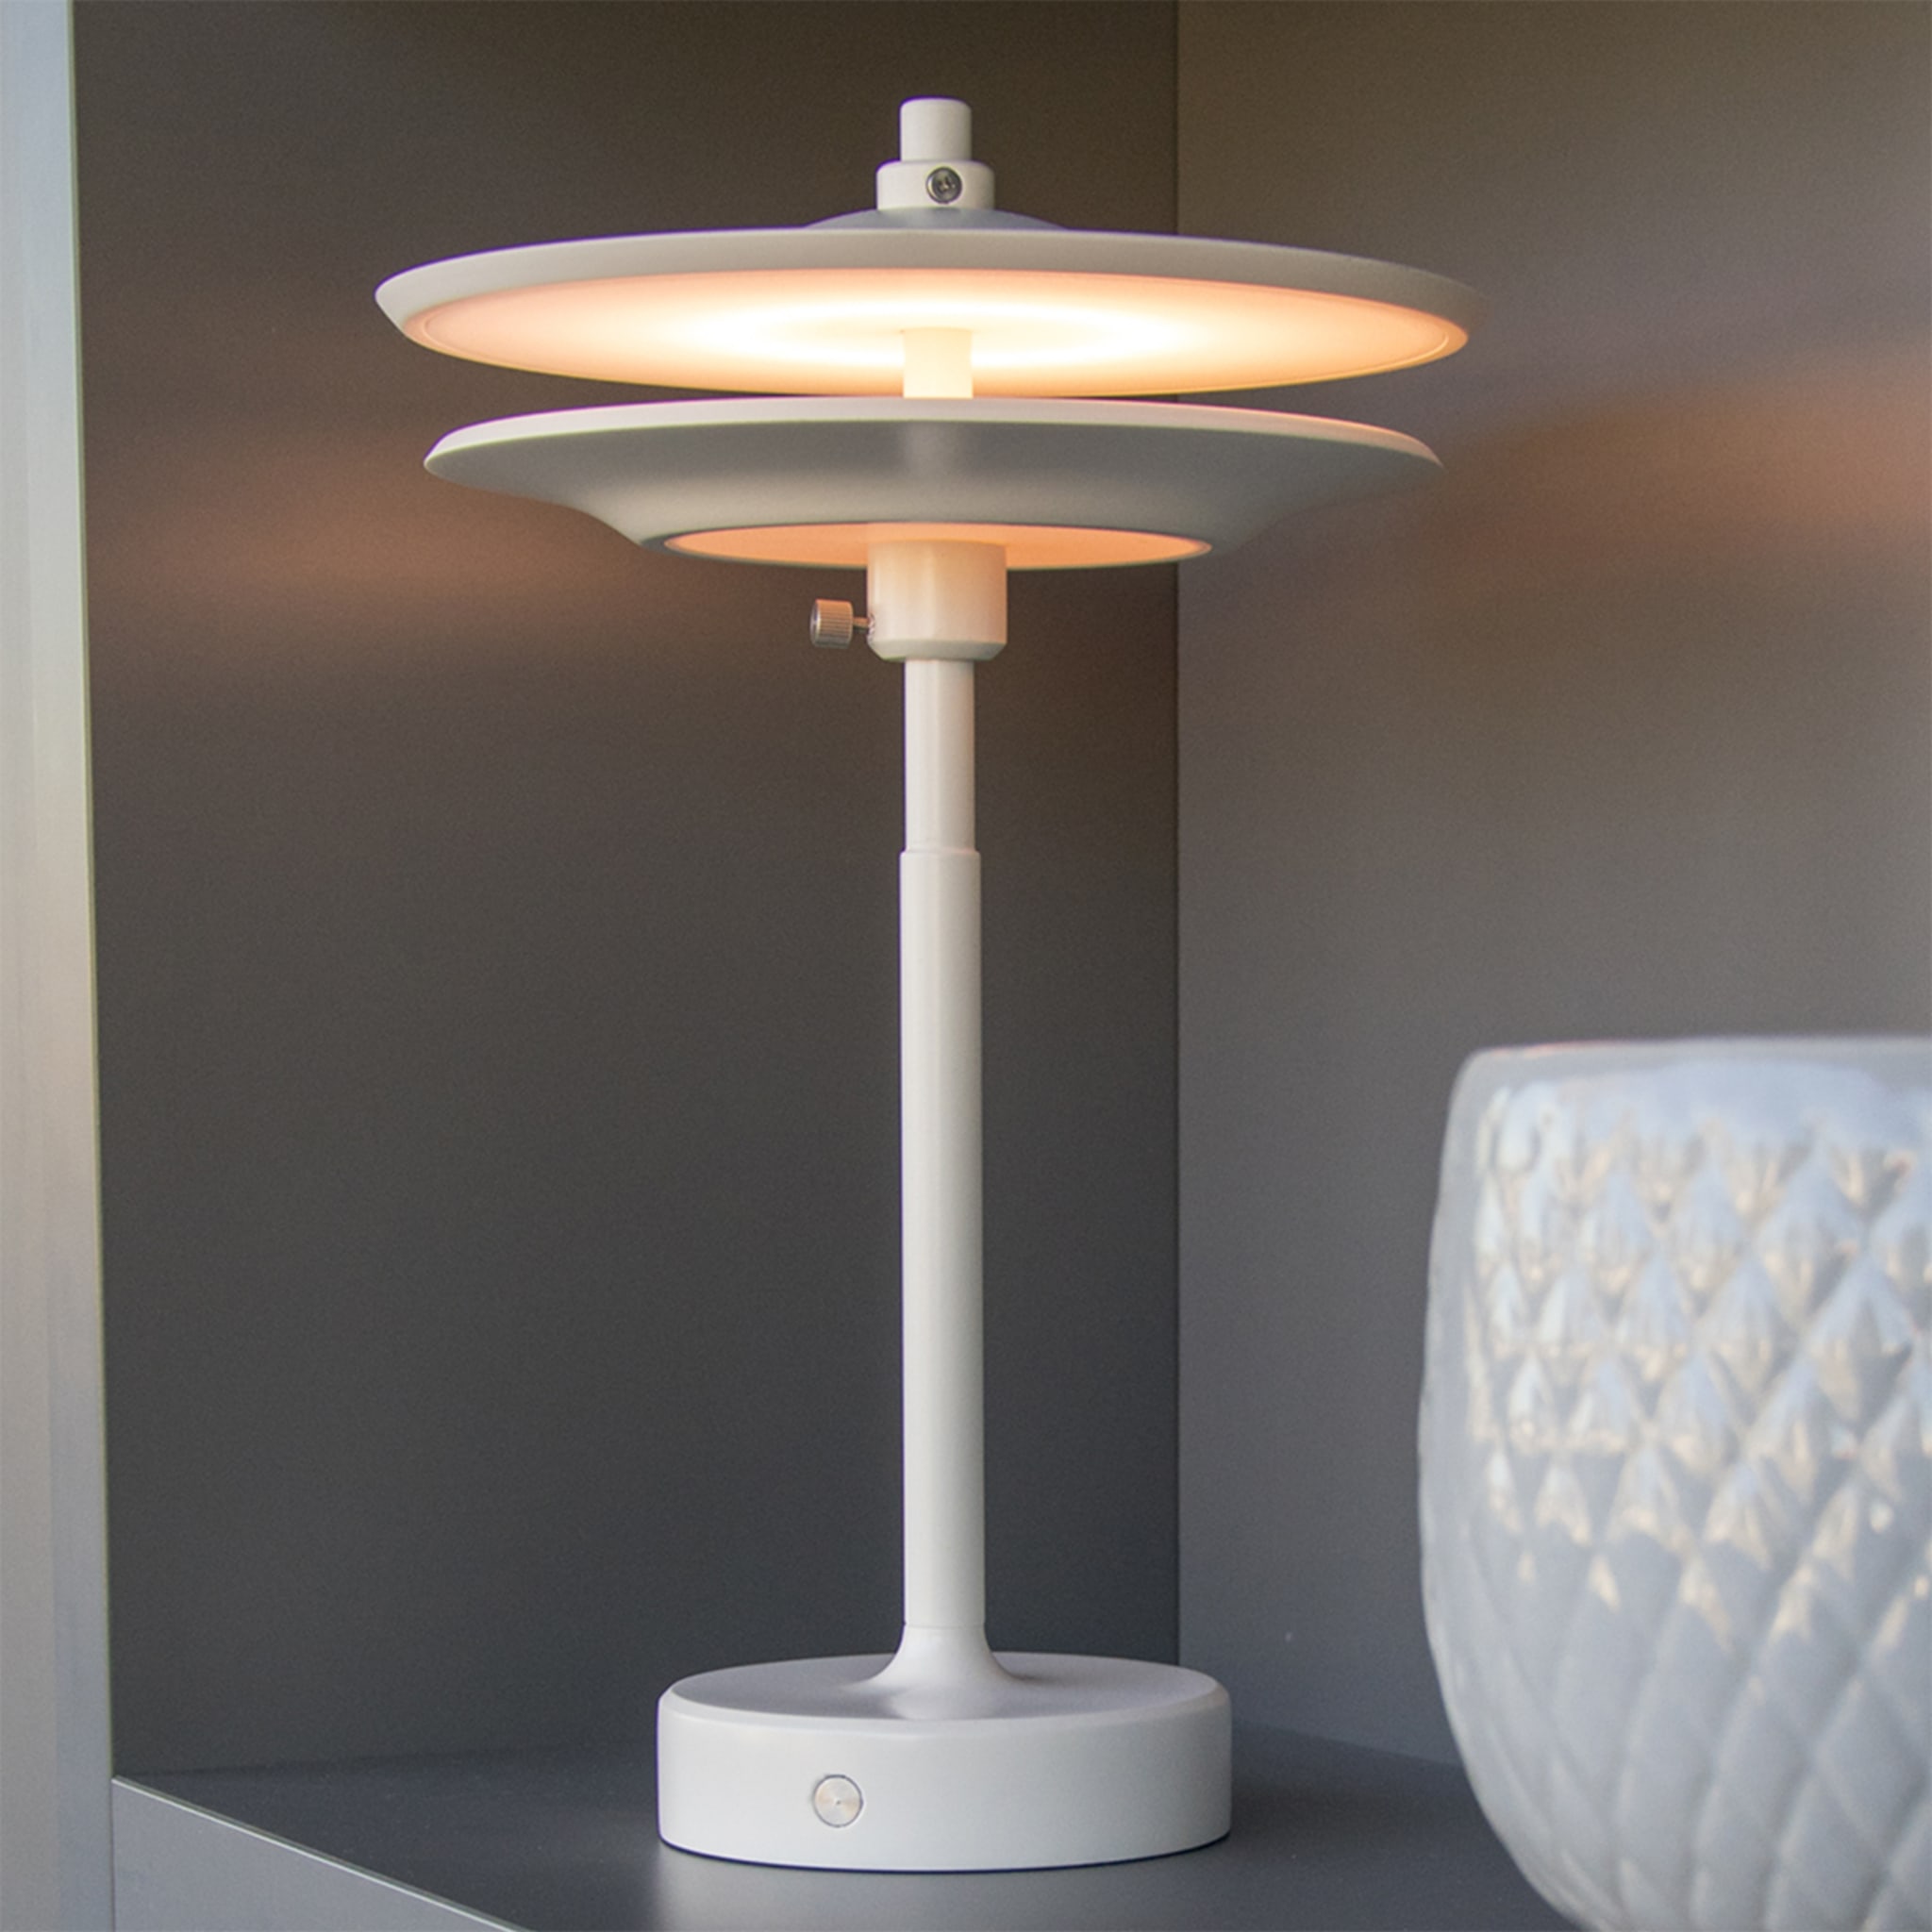 Drum White Rechargeable Table Lamp by Albore Design - Alternative view 2